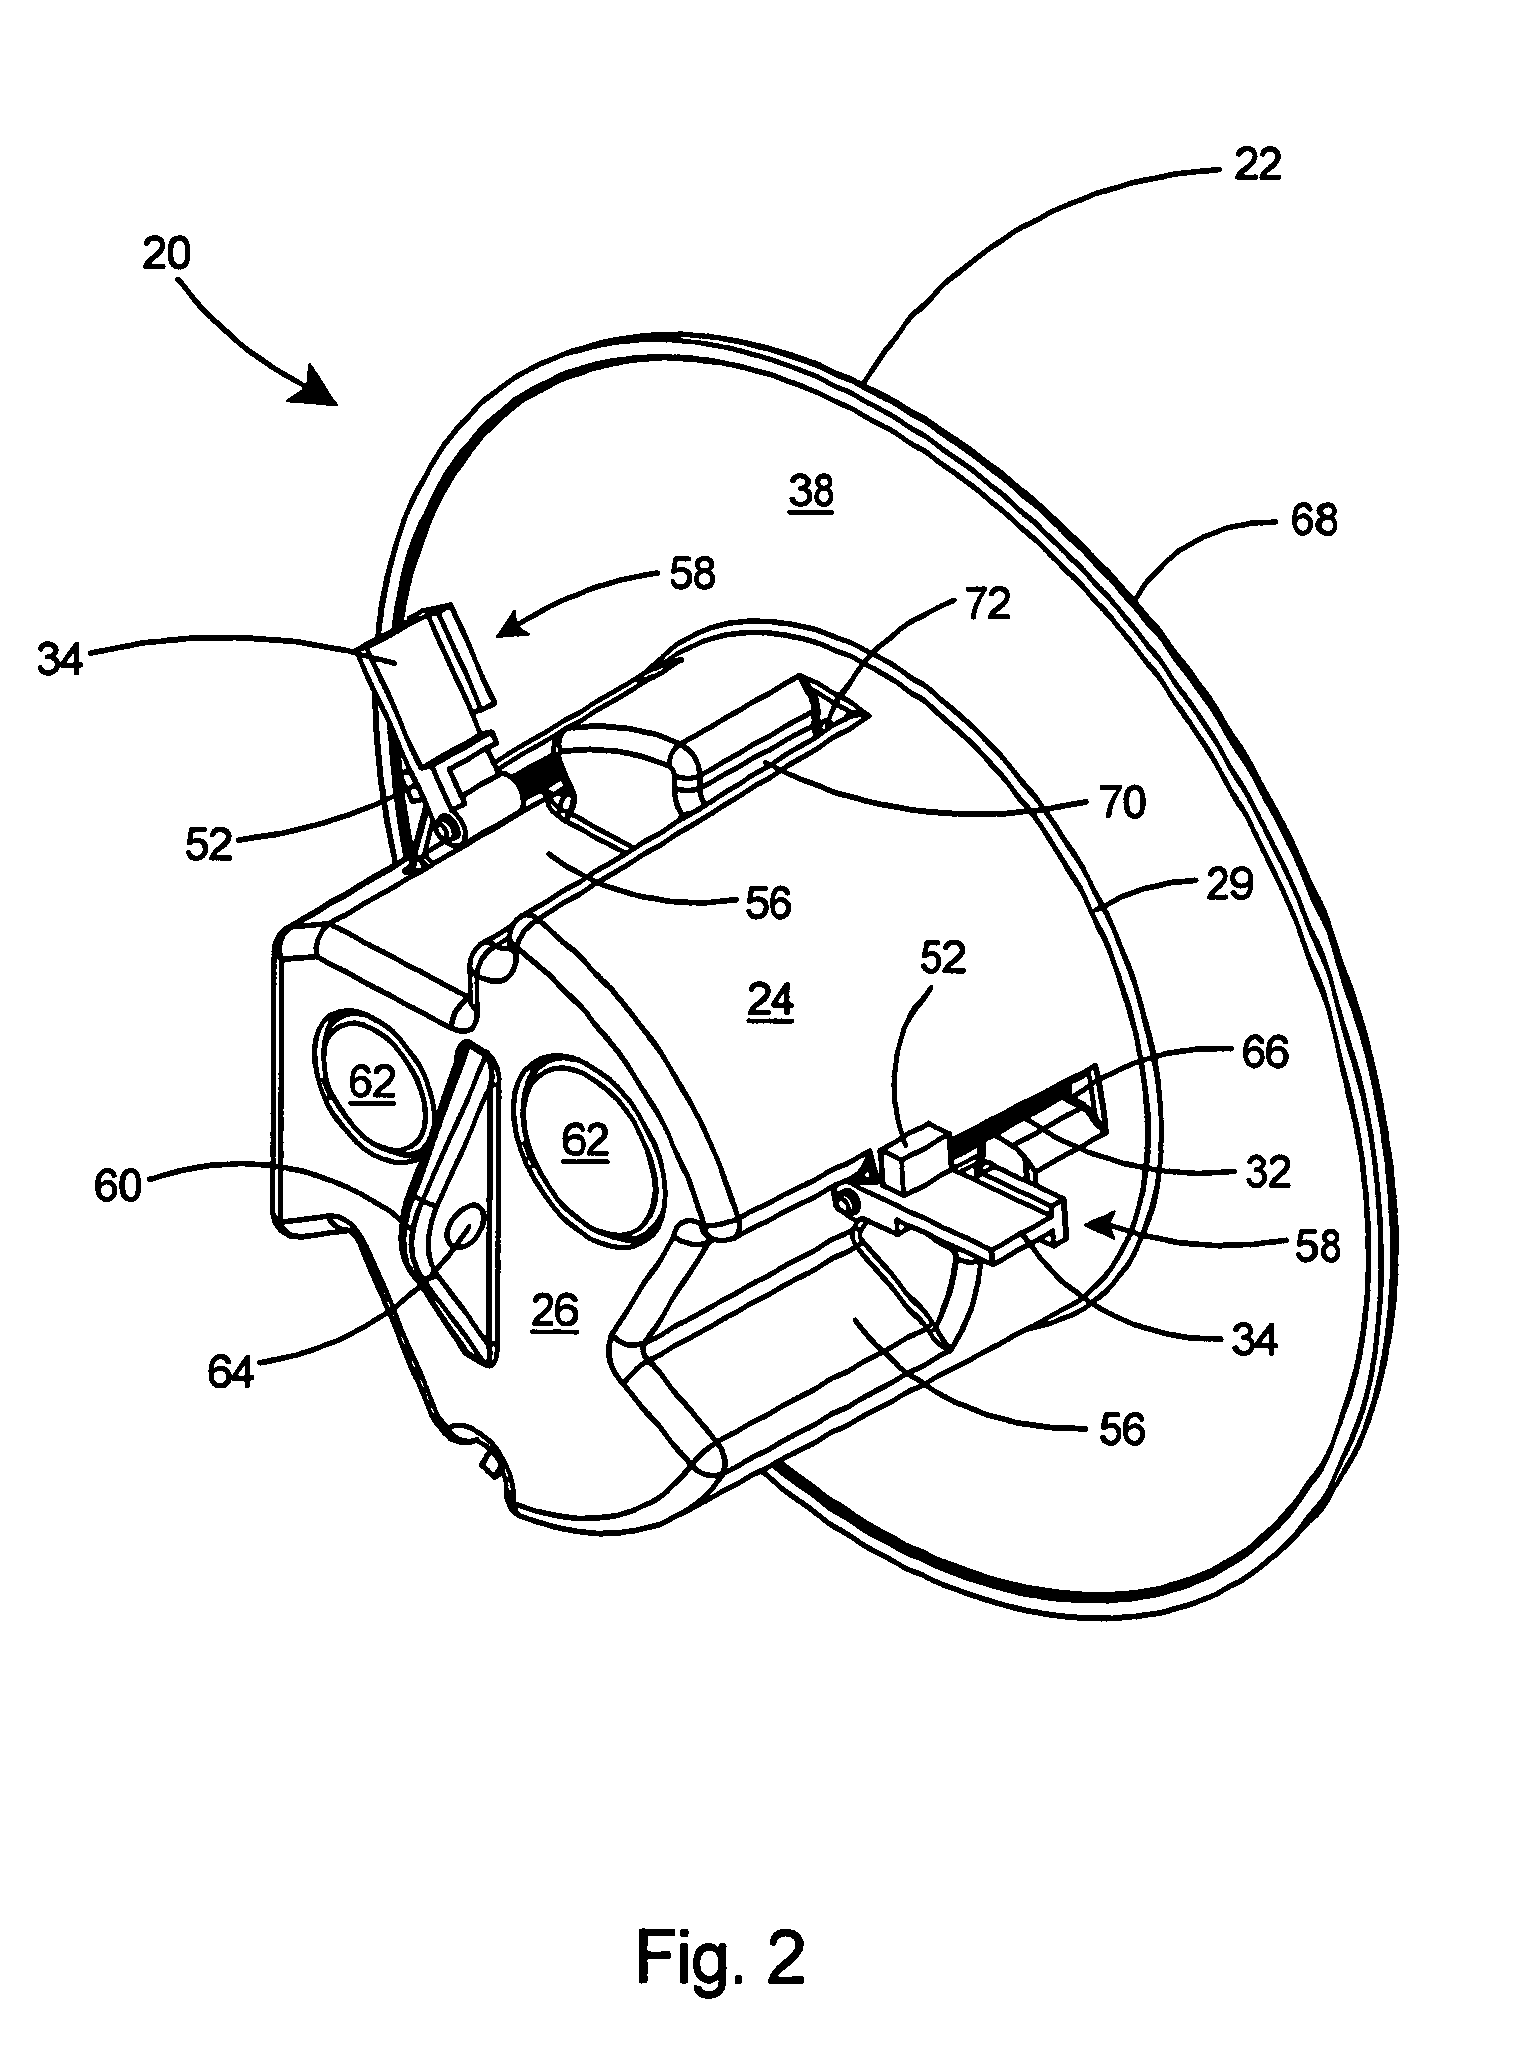 Electrical box assembly for mounting and supporting a security camera or fixture